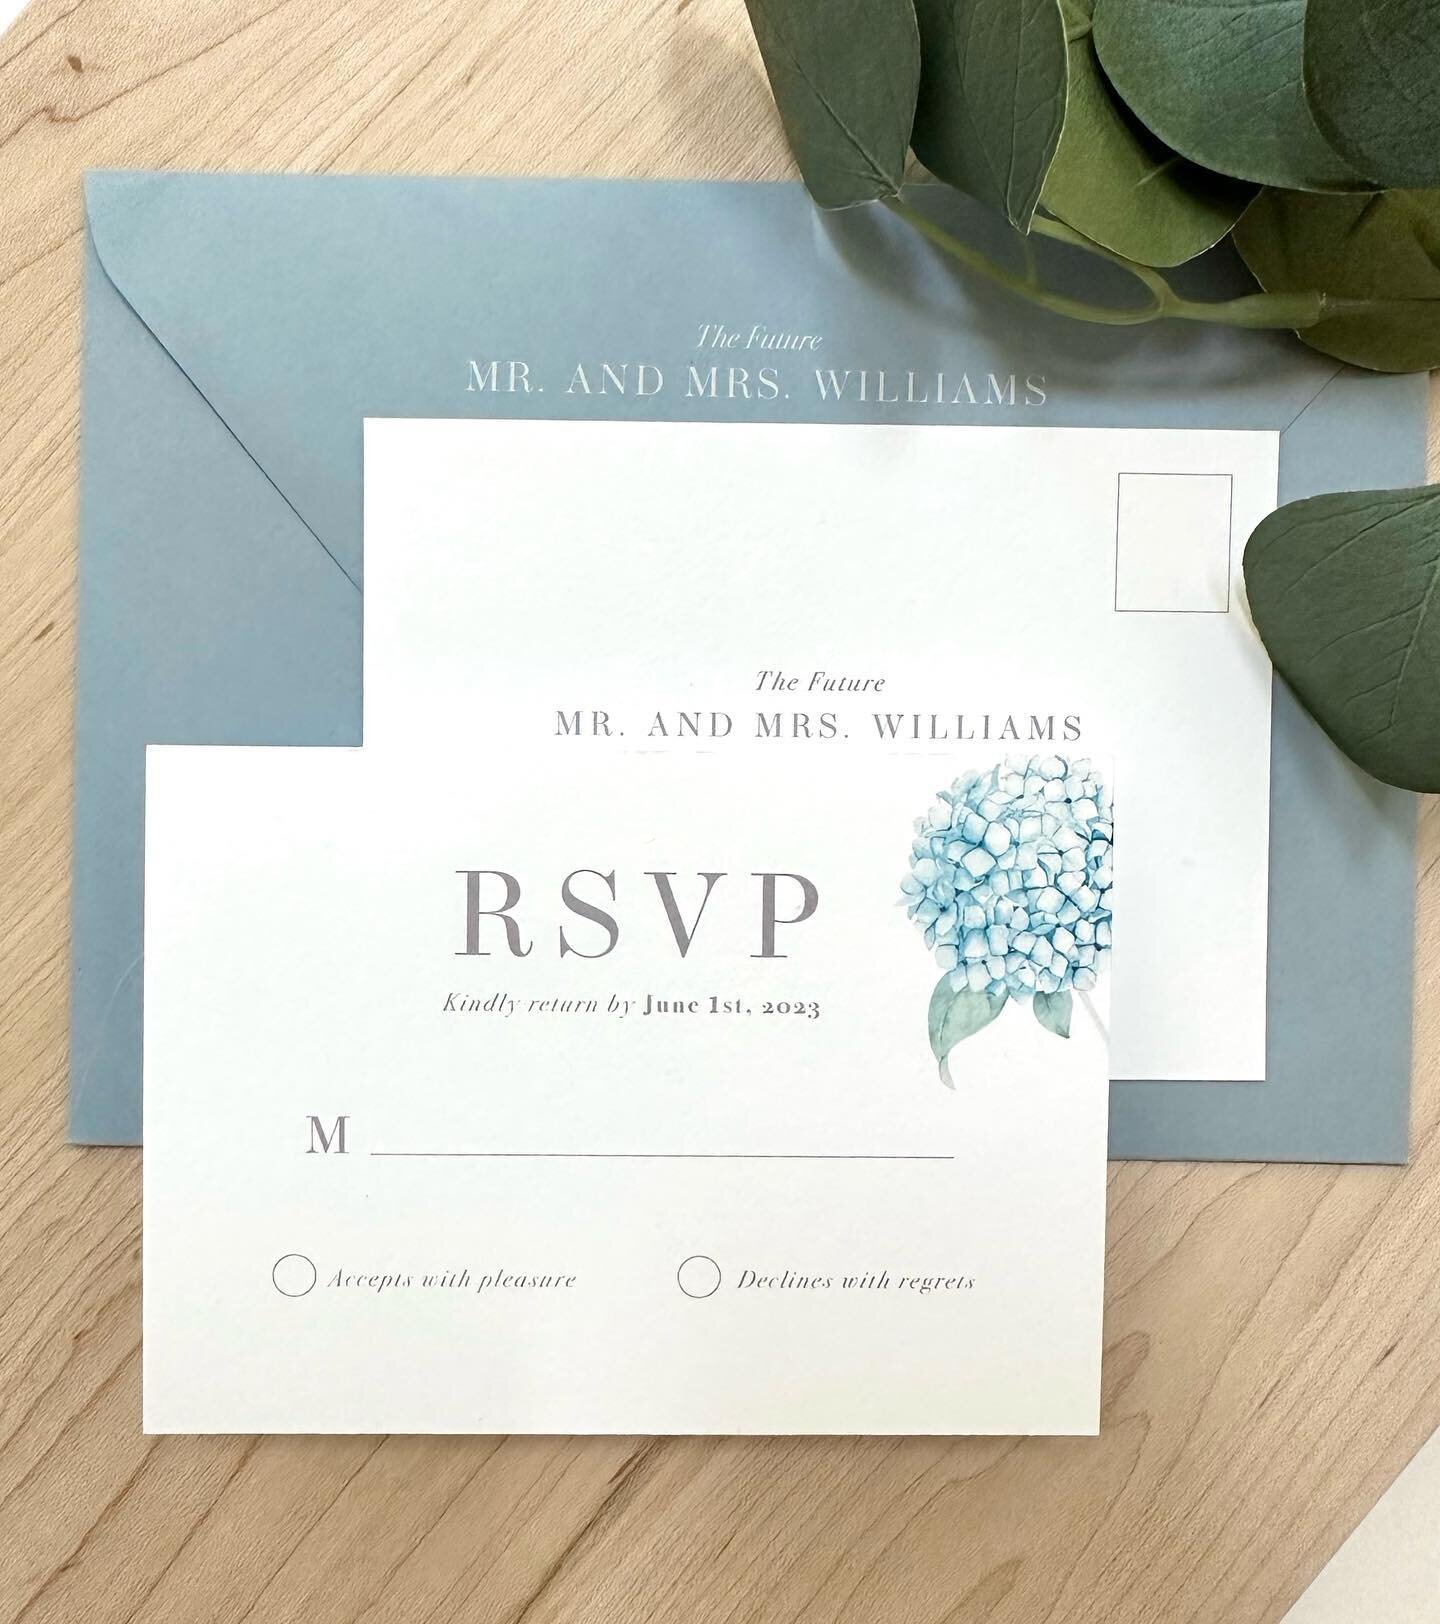 Have you ever thought about turning your RSVP card into a post card?! We love this idea! 
&bull;
&bull;
&bull;
&bull;
&bull;
#hydrangeas #weddingrsvp #rsvppostcard #weddingsuite #weddinginspiration #weddinginvitations #weddinginvite #weddingguest #br